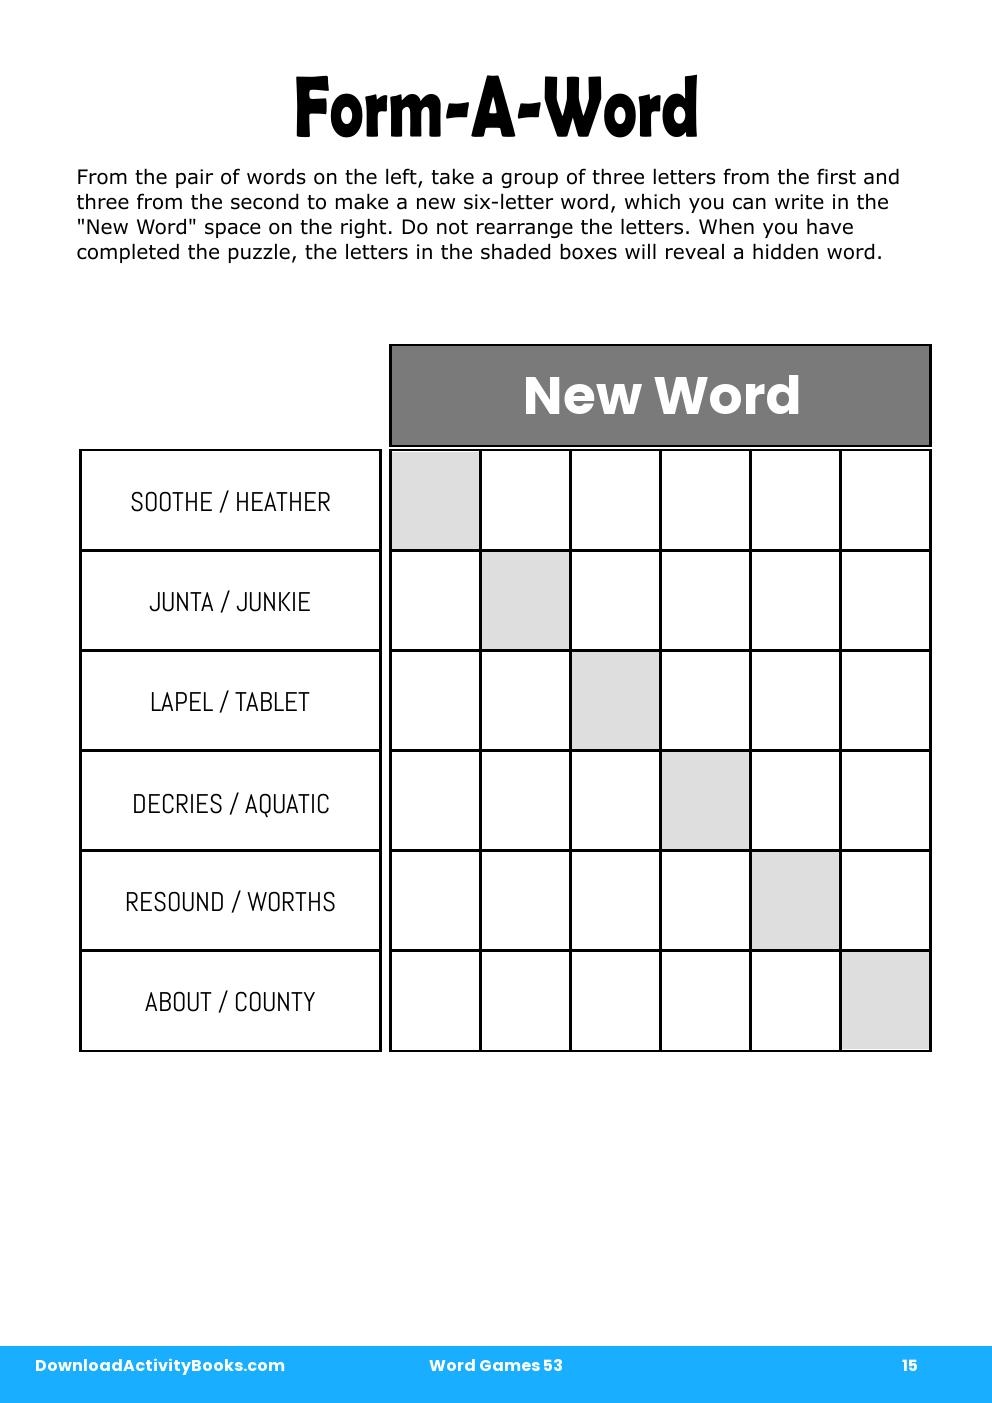 Form-A-Word in Word Games 53